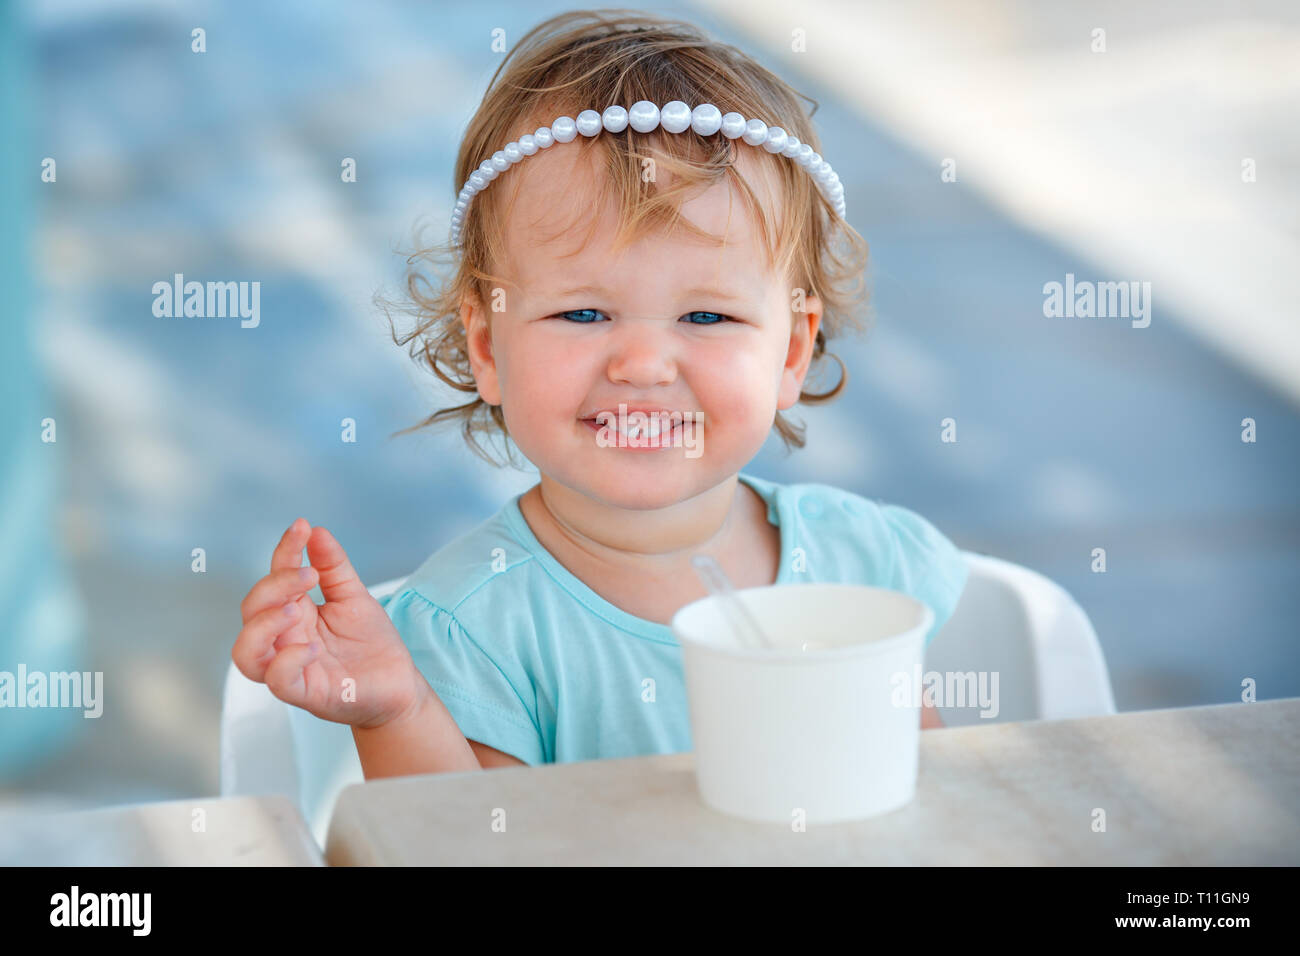 Adorable little girl eating ice cream at outdoor cafe on beautiful summer day Stock Photo